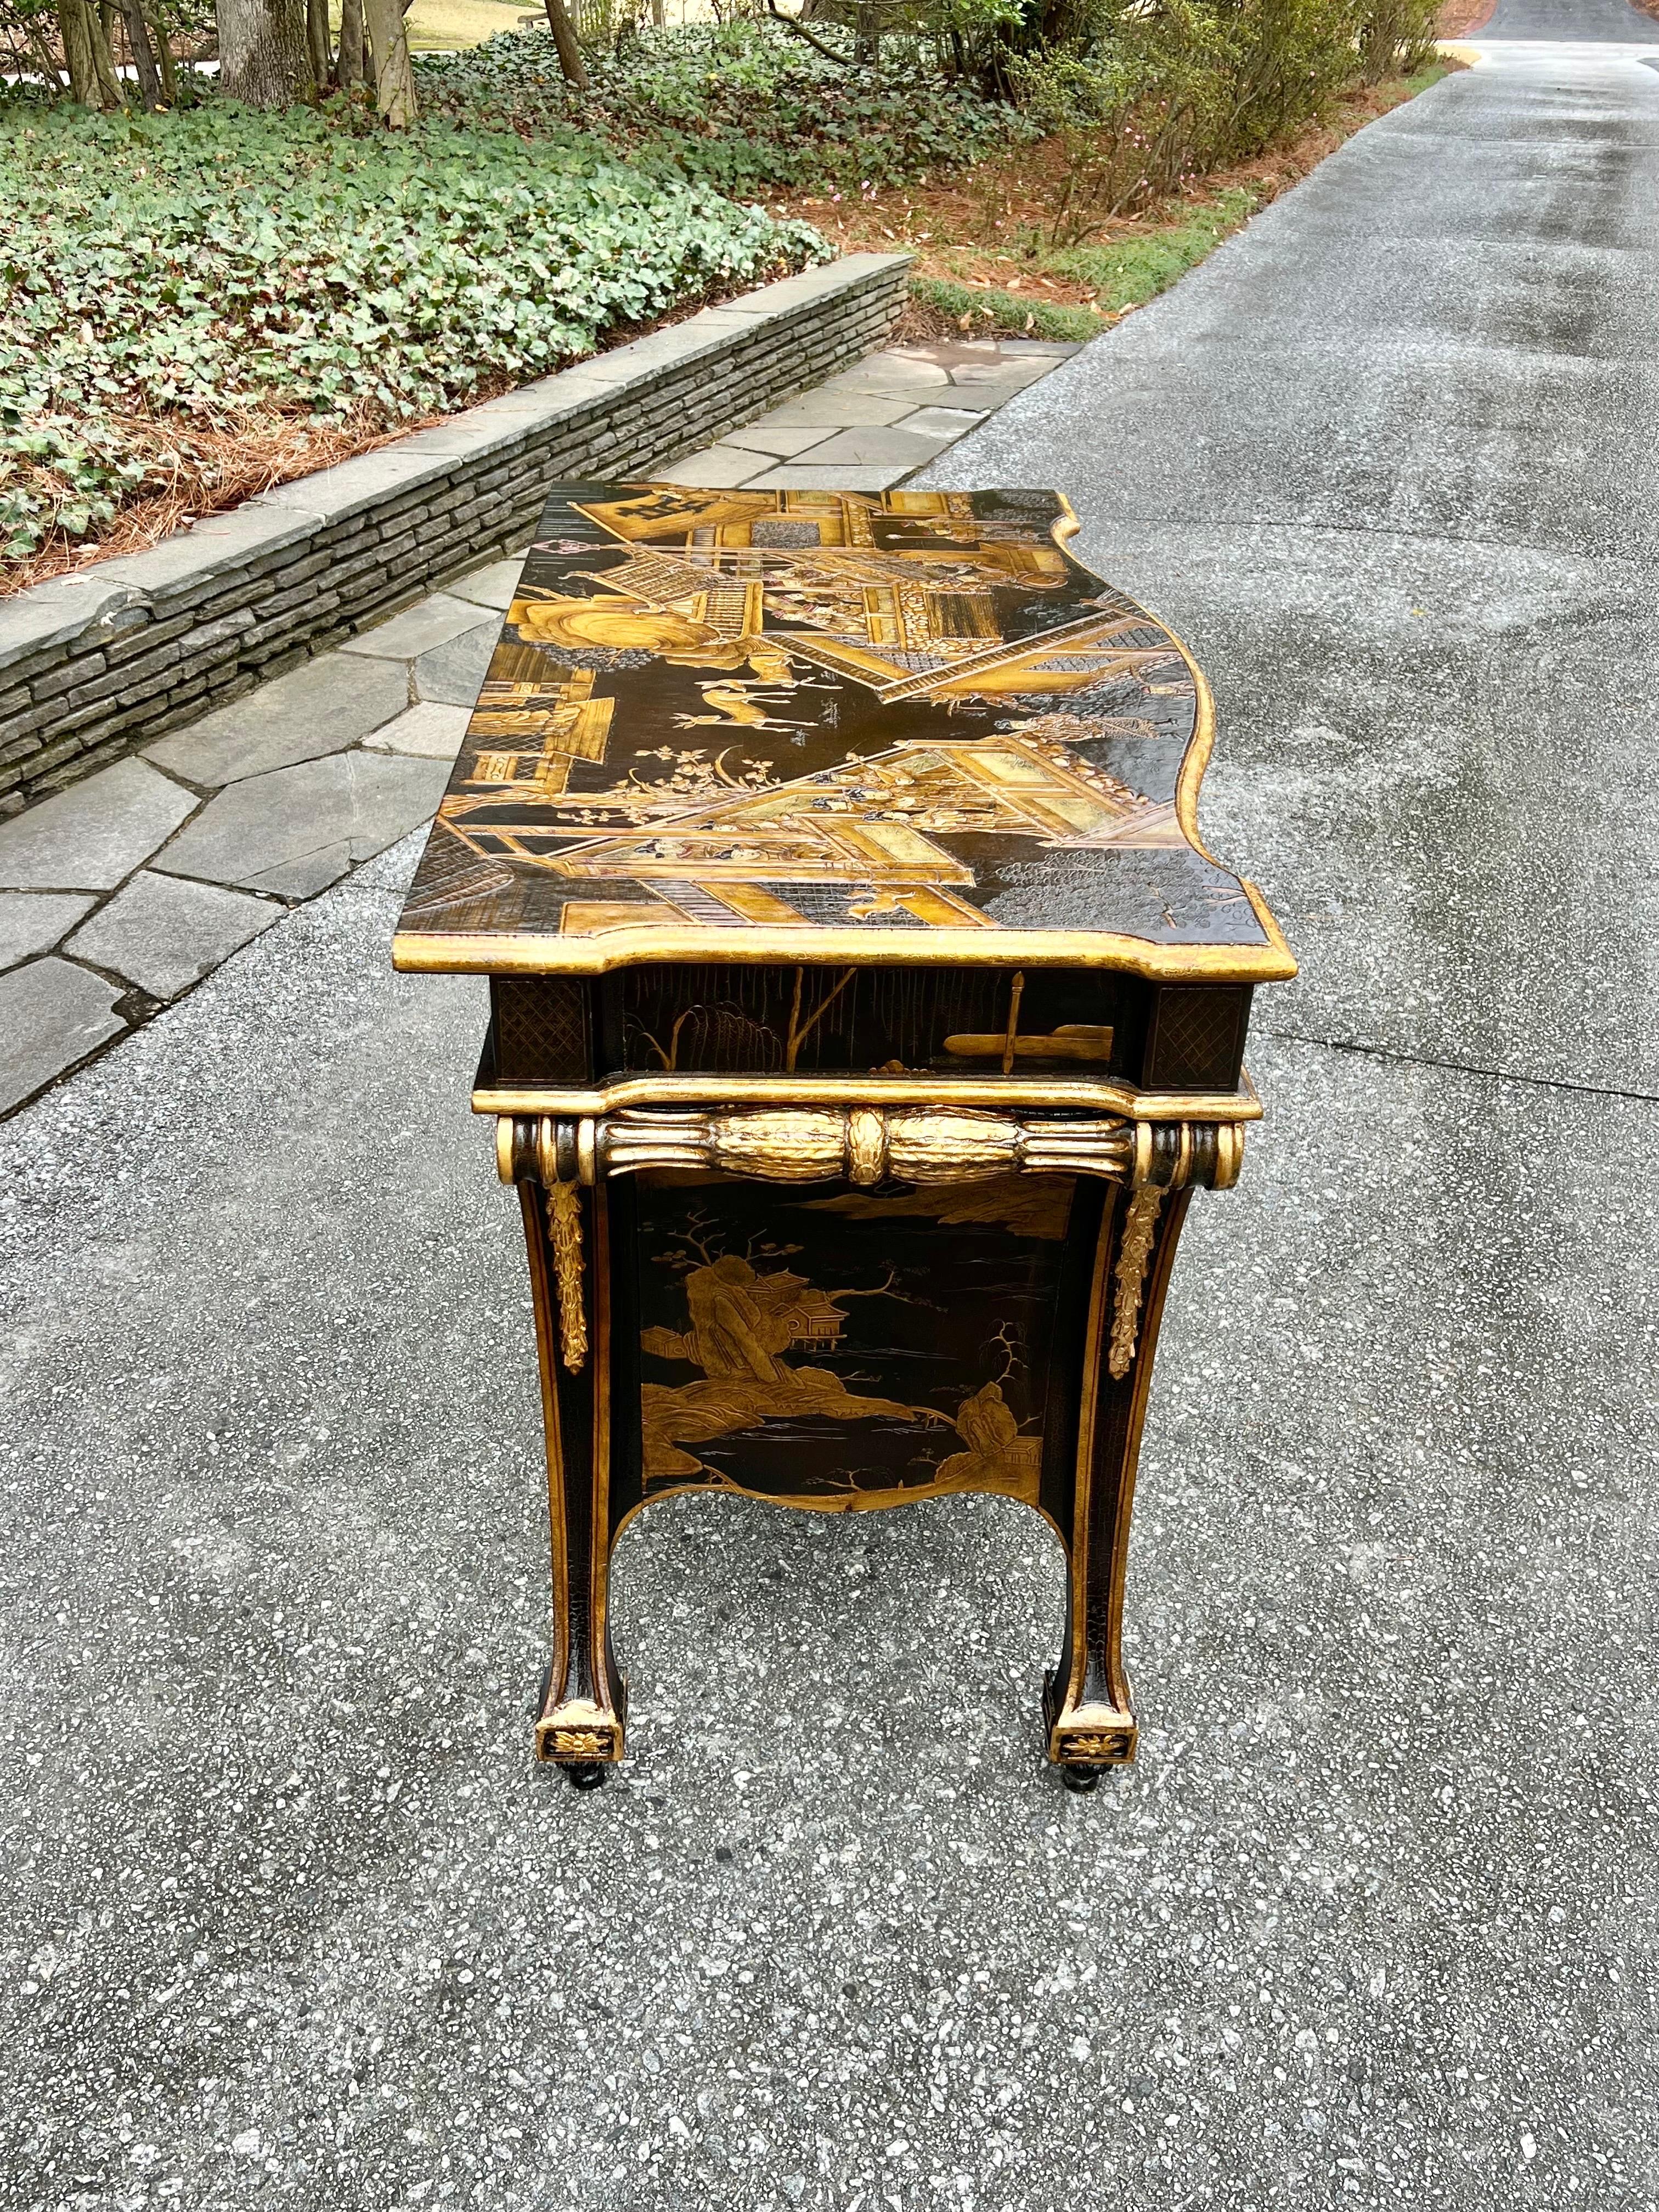 Exquisite Hand Painted Chippendale chinoiserie Commode in Black Lacquer by Baker In Excellent Condition For Sale In Atlanta, GA